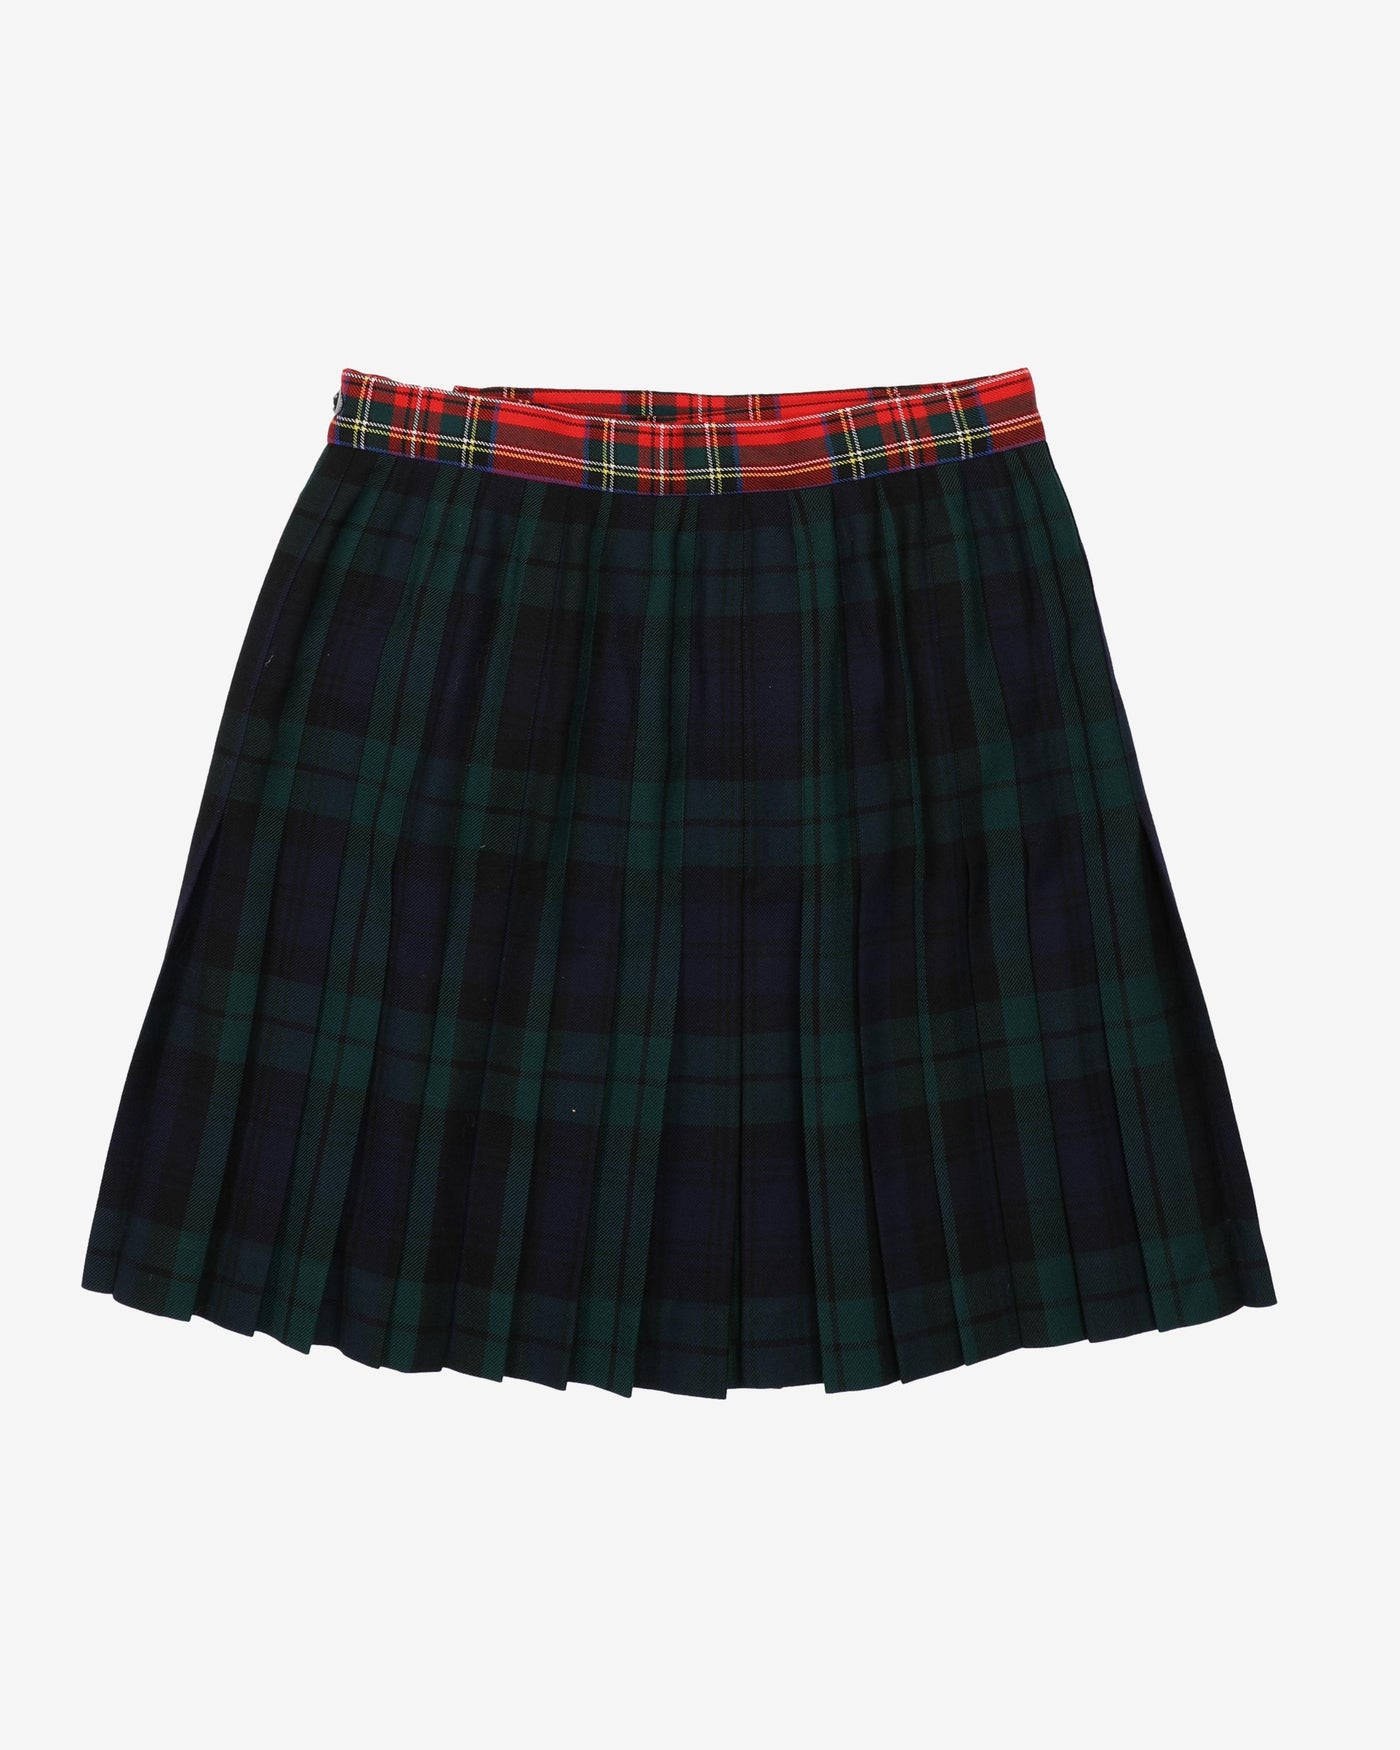 Tommy Hilfiger Wool Skirt - S